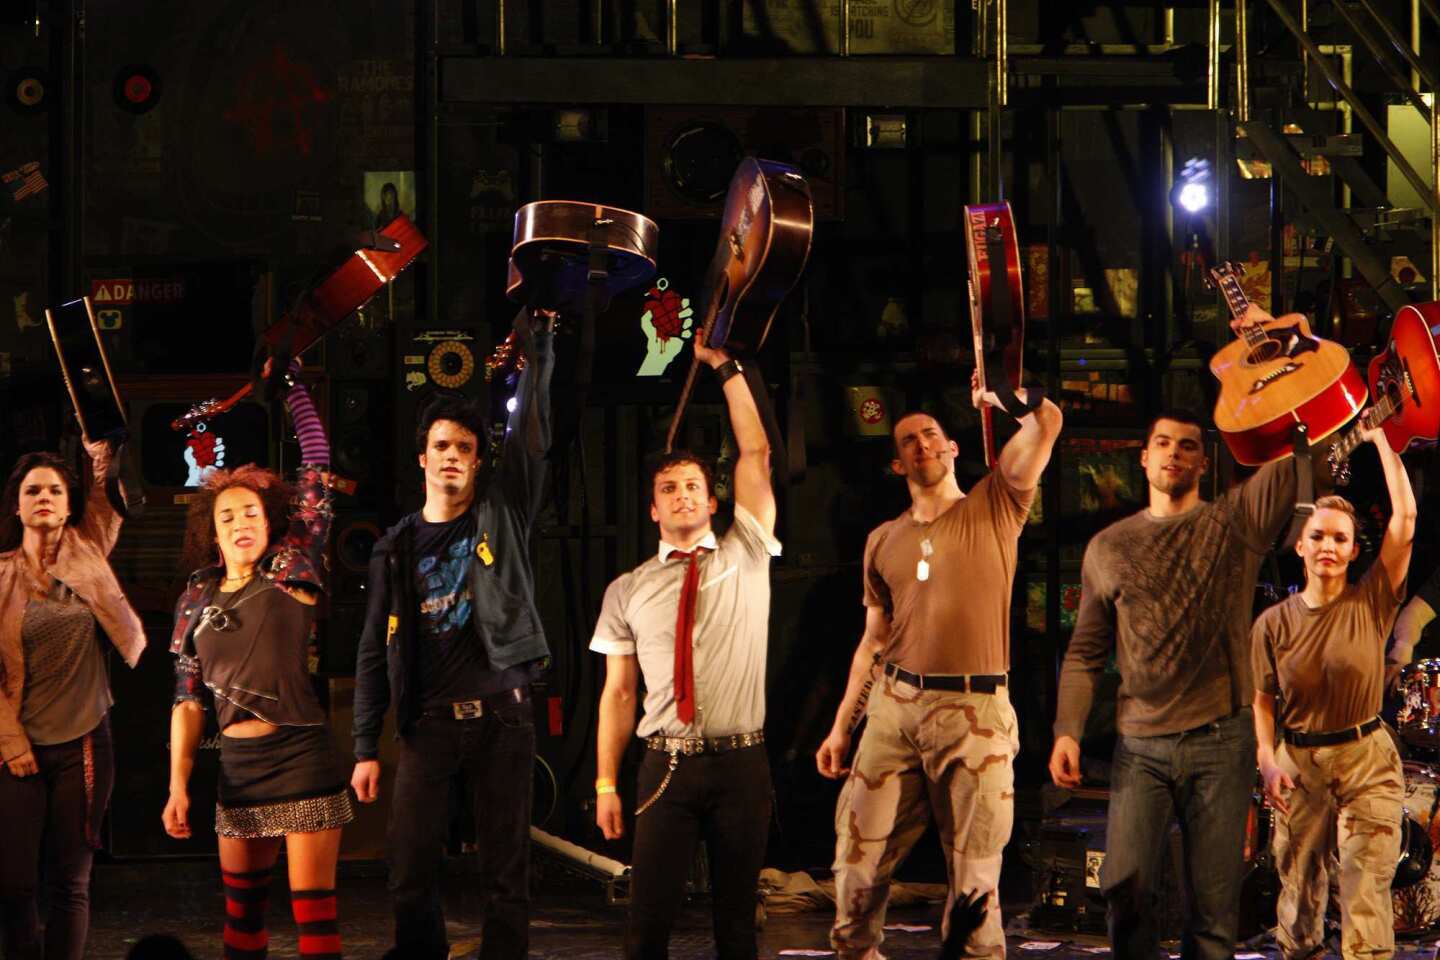 The curtain call is accompanied by the thrumming of many guitars. The tour's three leads are at center: Jake Epstein, in black; Van Hughes in white shirt; and Scott J. Campbell in military fatigues. "American Idiot" is visiting L.A. after its Berkeley debut and a Broadway run.